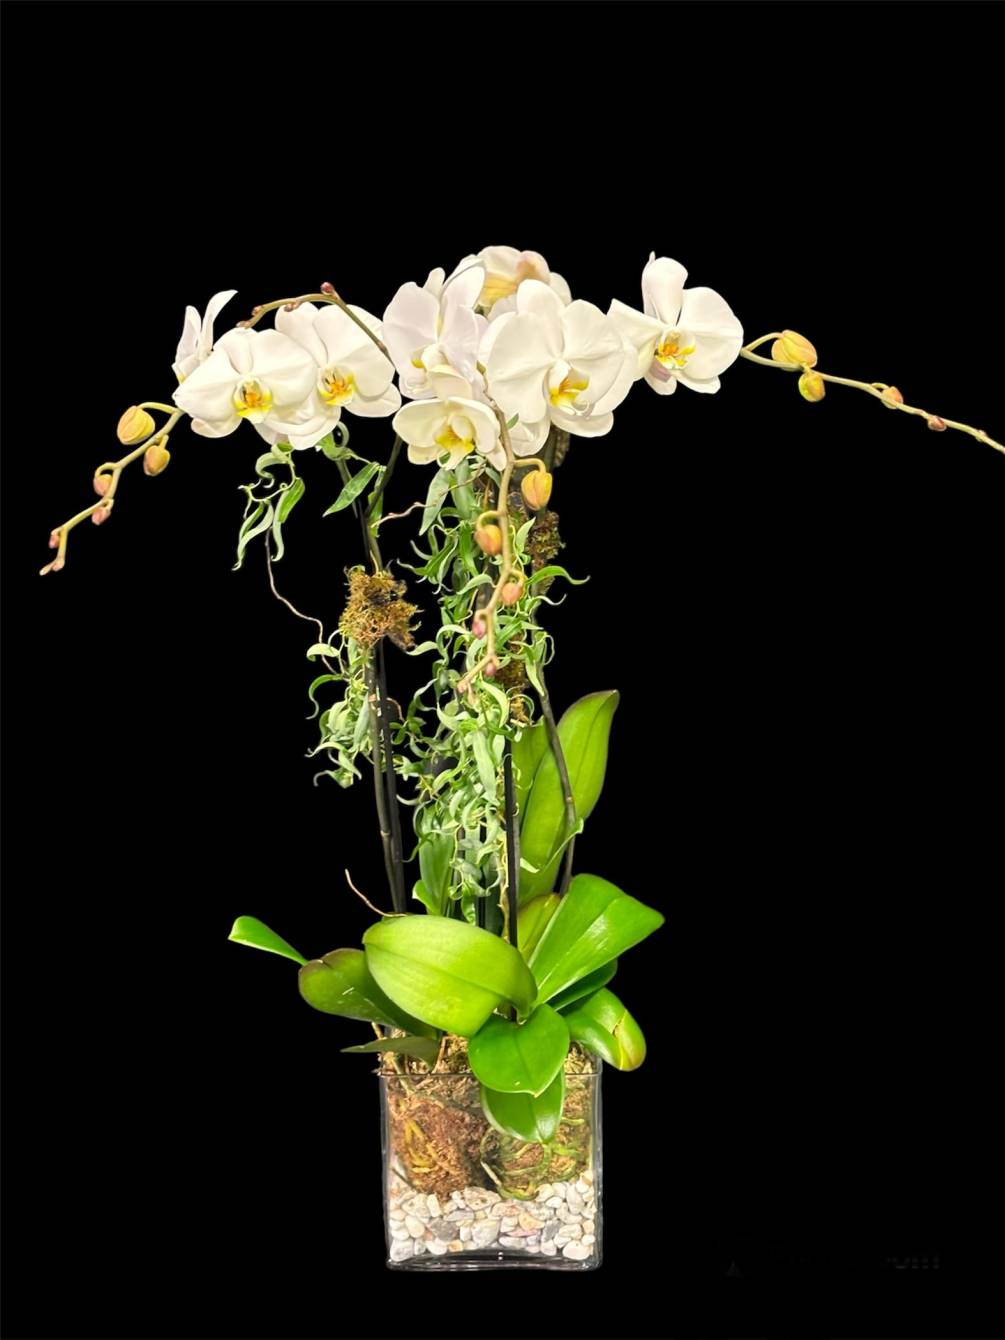 4 stems of white orchid plants in square crystal vase.

